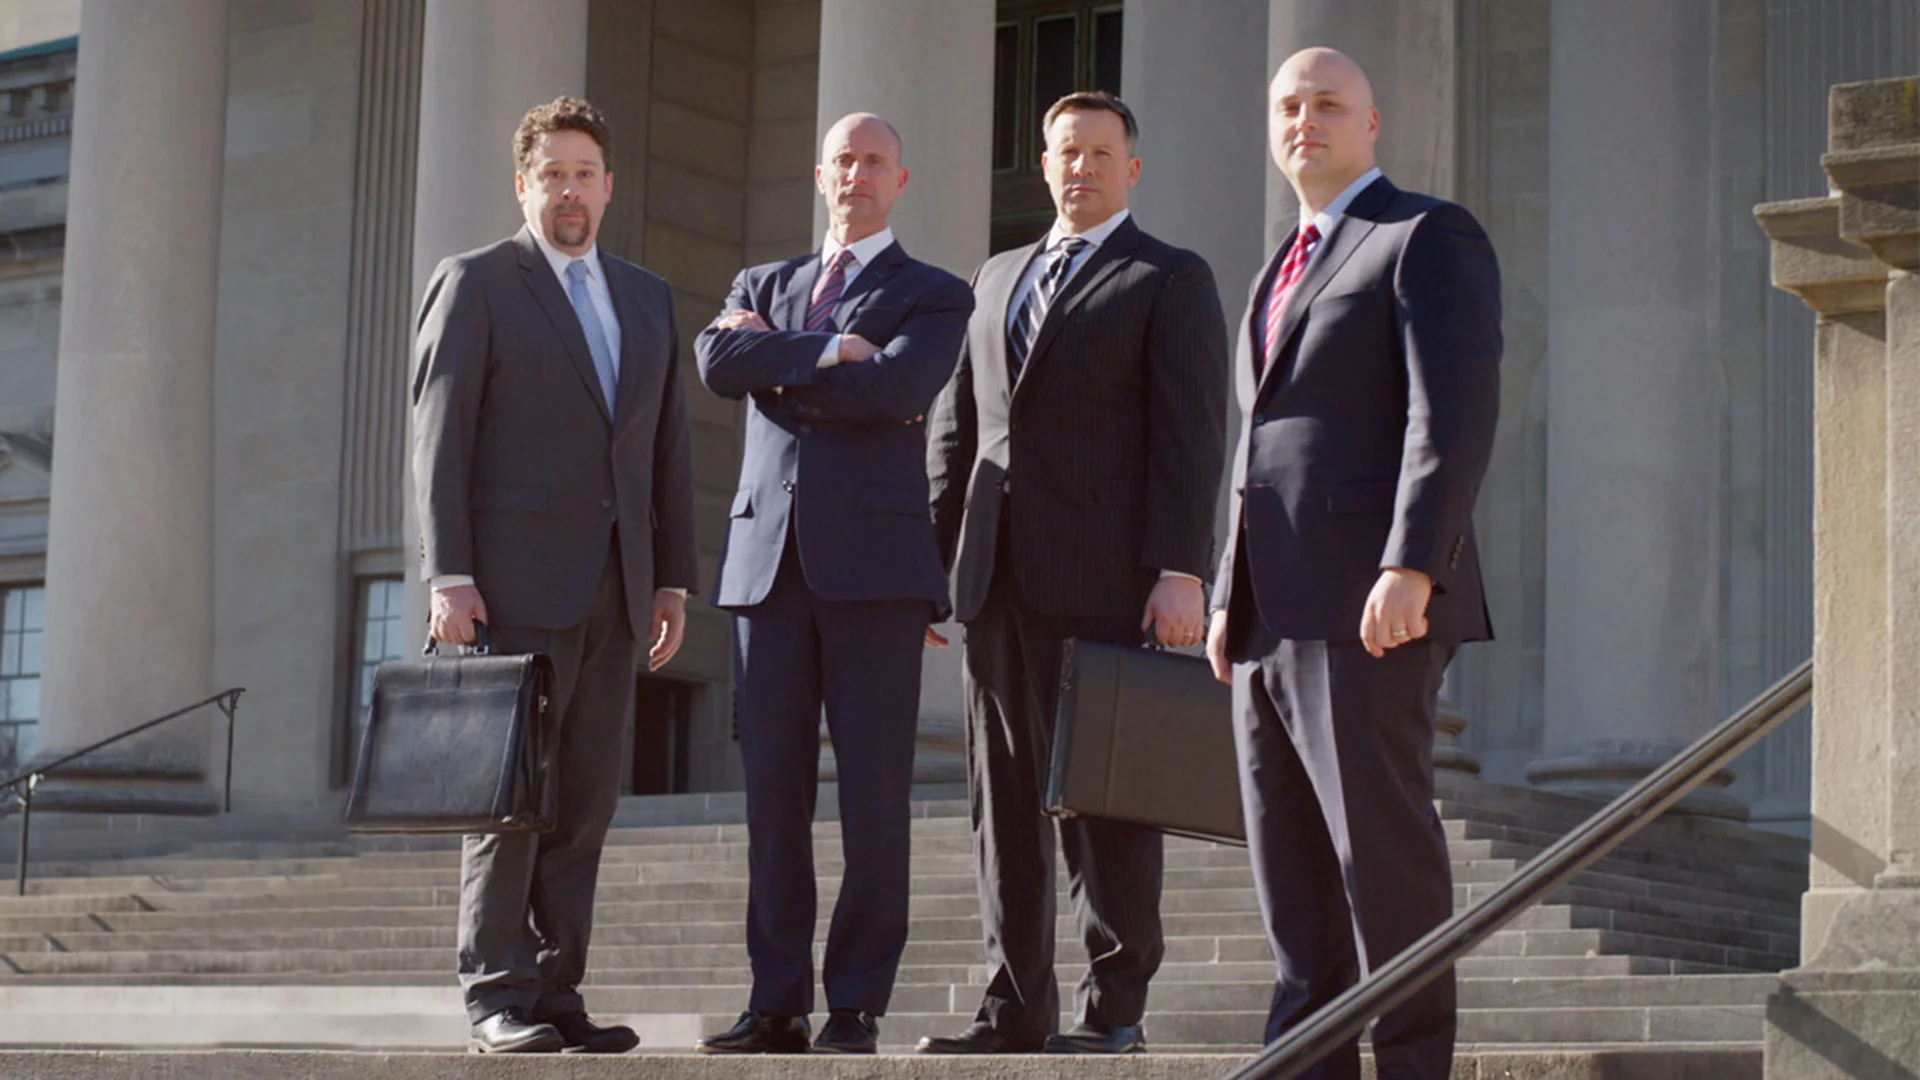 The best team of personal injury attorneys in Maryland and DC, at D'Amore personal injury law